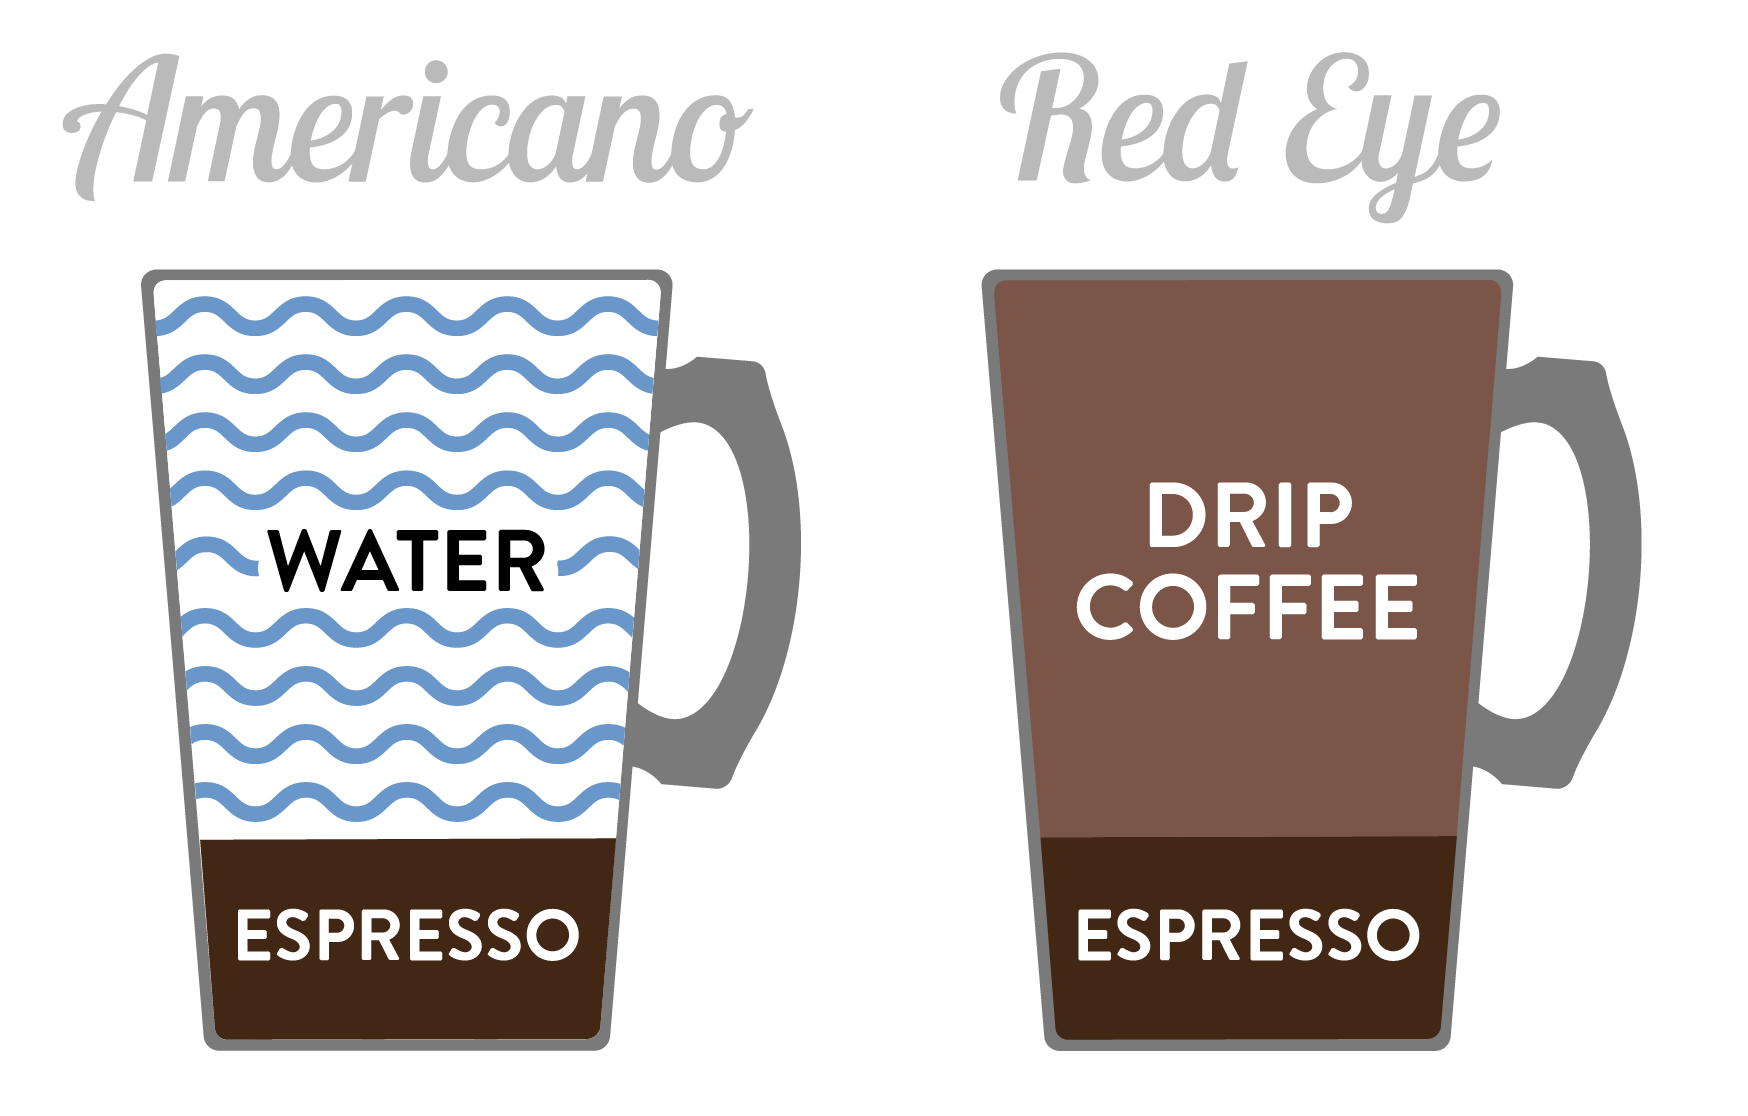 Americano and Red Eye diagram